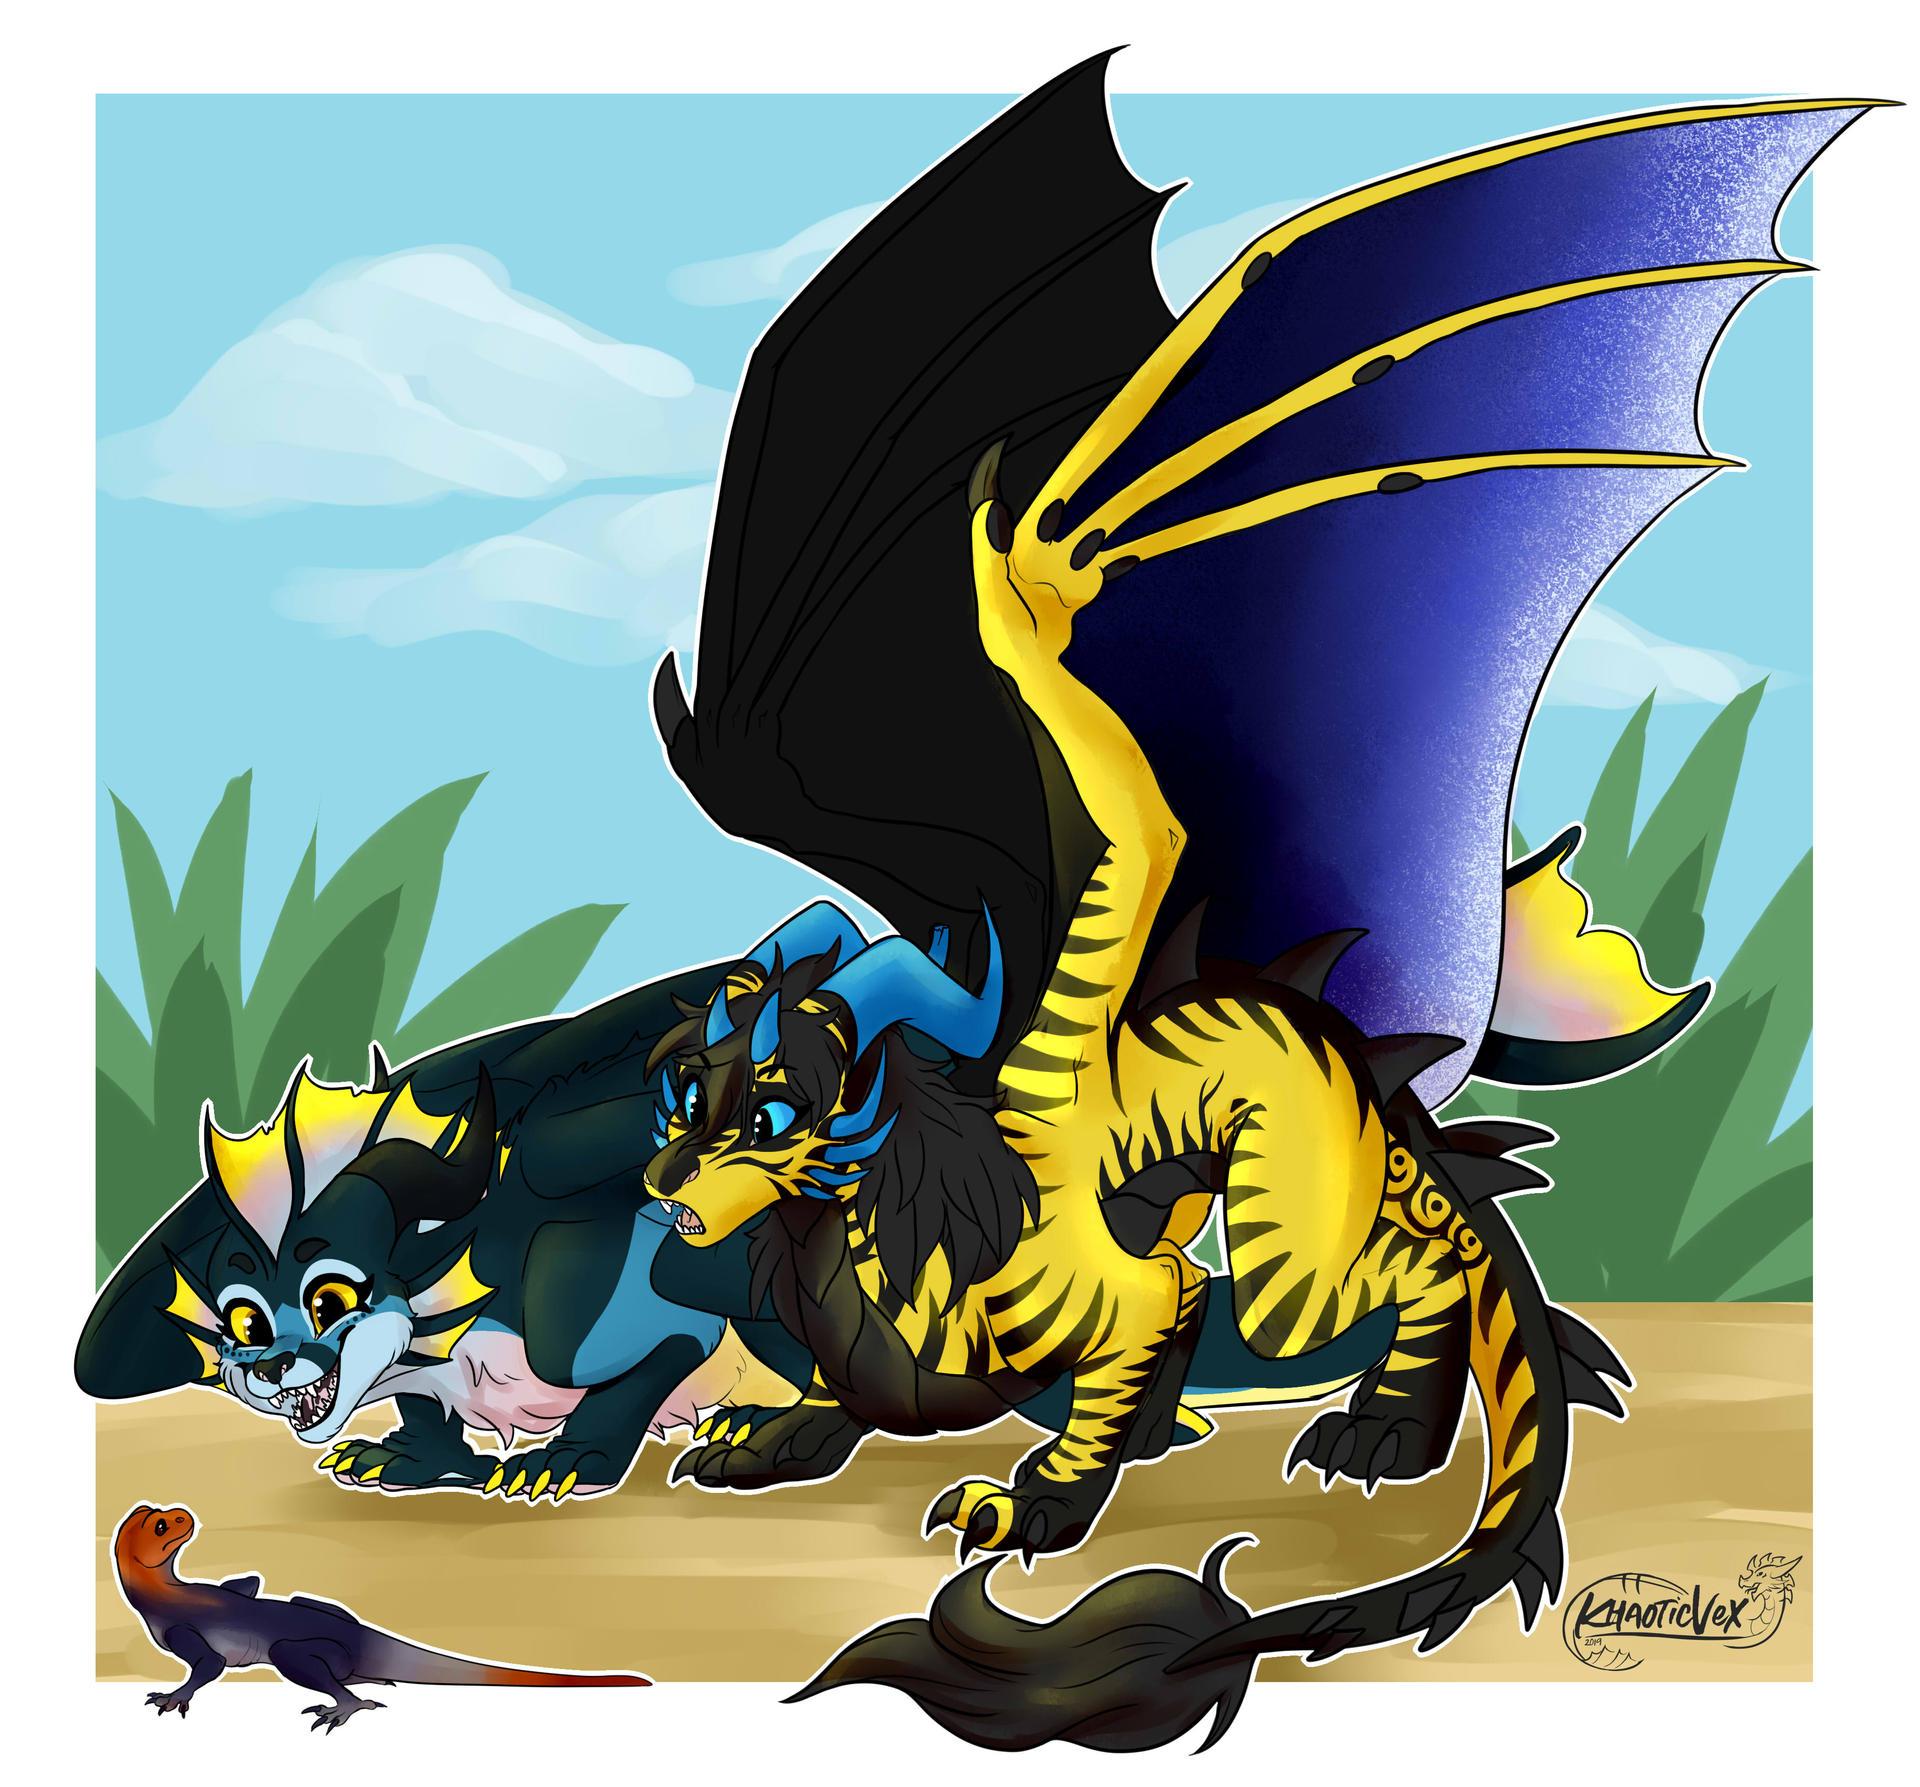 nightchaser_meets_aqua___ych_commission__by_khaoticvex_dd8t225-fullview.jpg